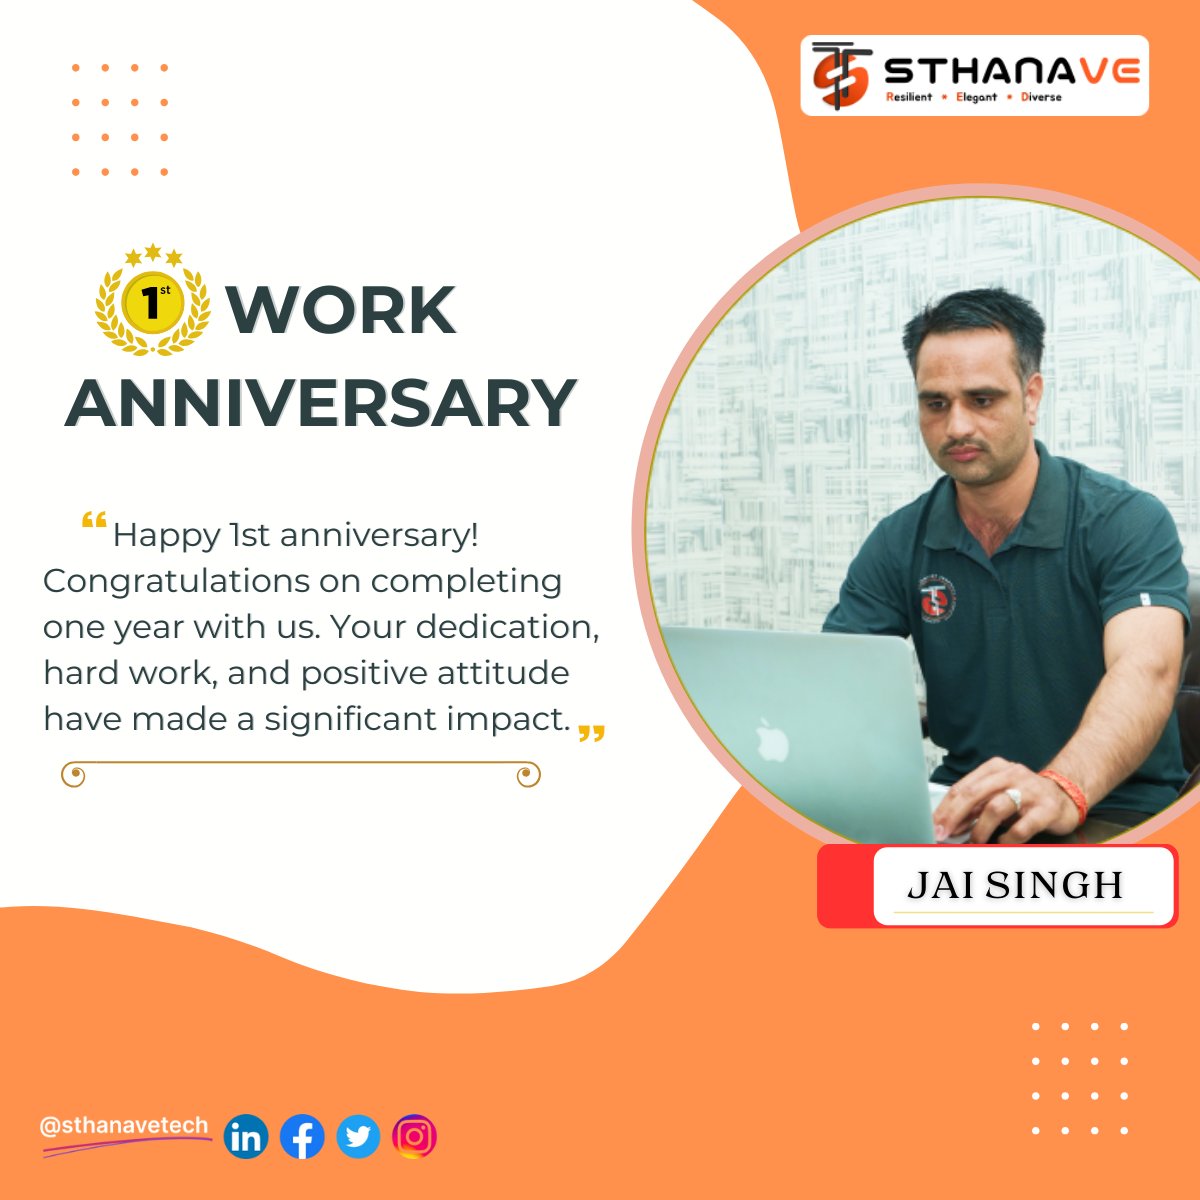 Happy 1st work anniversary! Congratulations on completing one year with us. Your dedication, hard work, and positive attitude have made a significant impact. 💐💐💐 #workanniversary #CelebratingSuccess #OneYearAtWork #sthanavetechnologies #durg